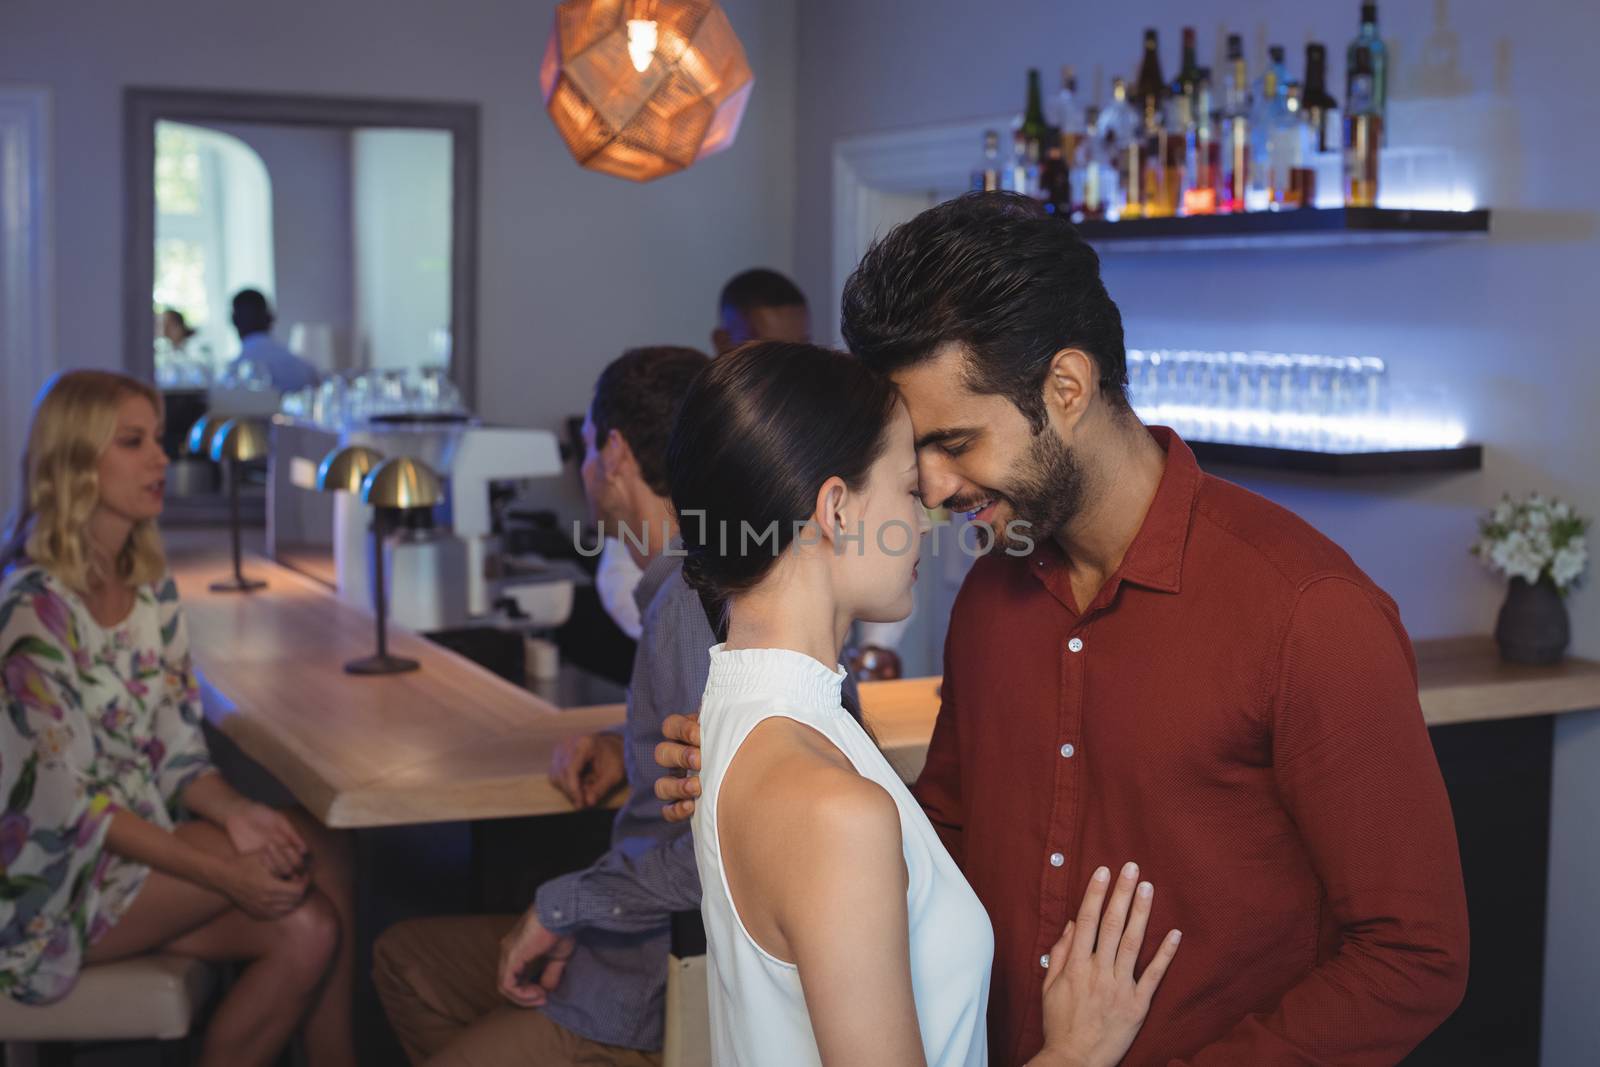 Couple embracing each other at bar restaurant by Wavebreakmedia